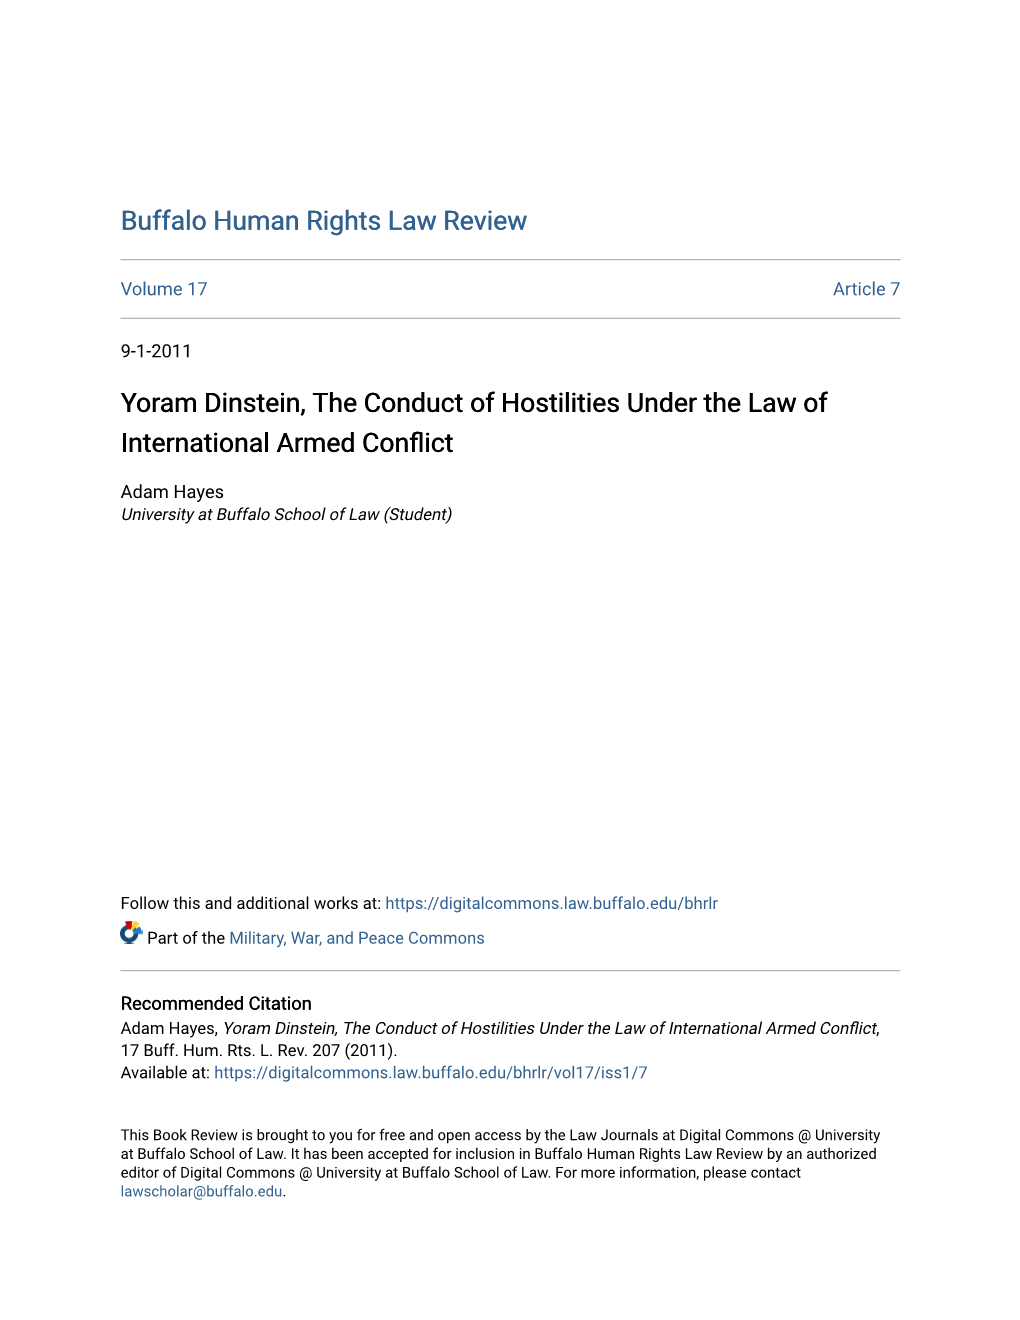 Yoram Dinstein, the Conduct of Hostilities Under the Law of International Armed Conflict